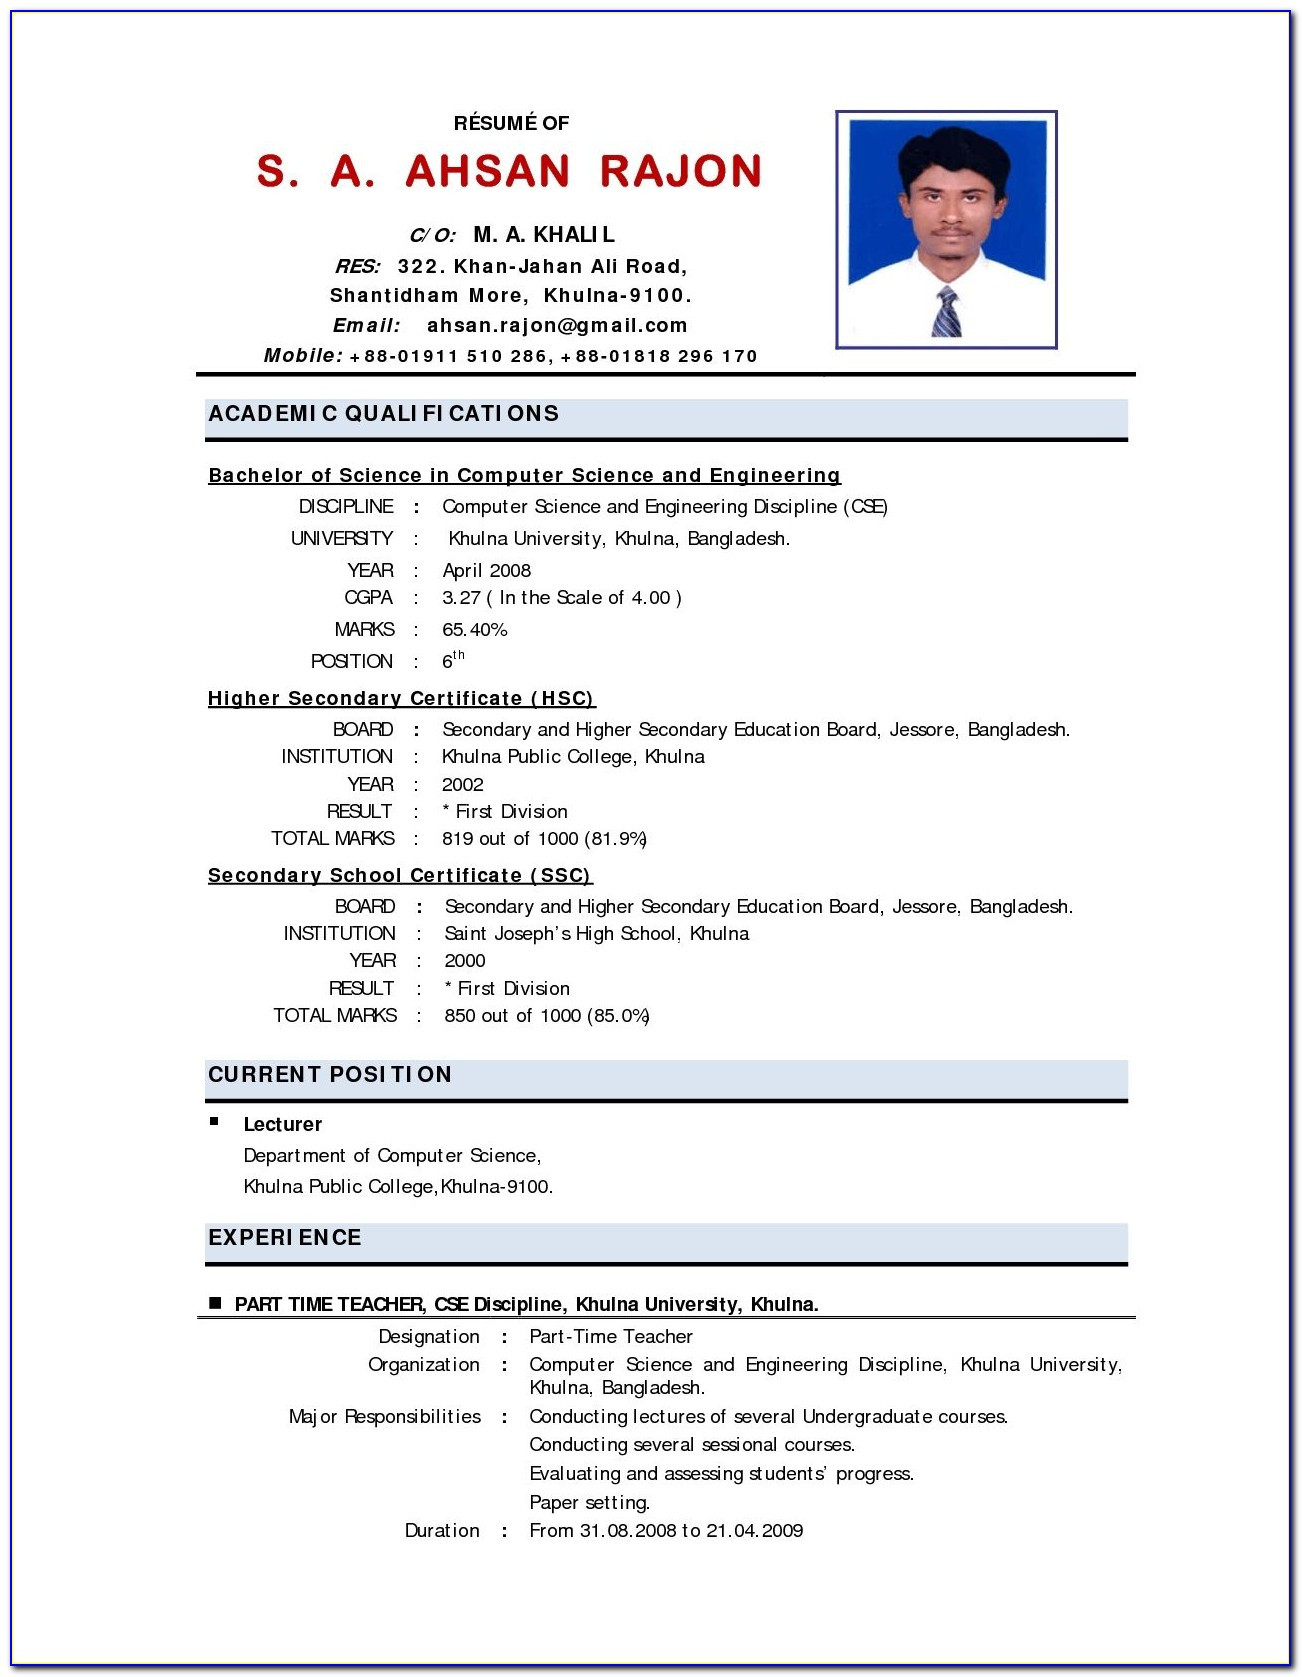 Sample Resume for School Teacher India Resume format for Teaching Post – Lets Face the Music and Resume …